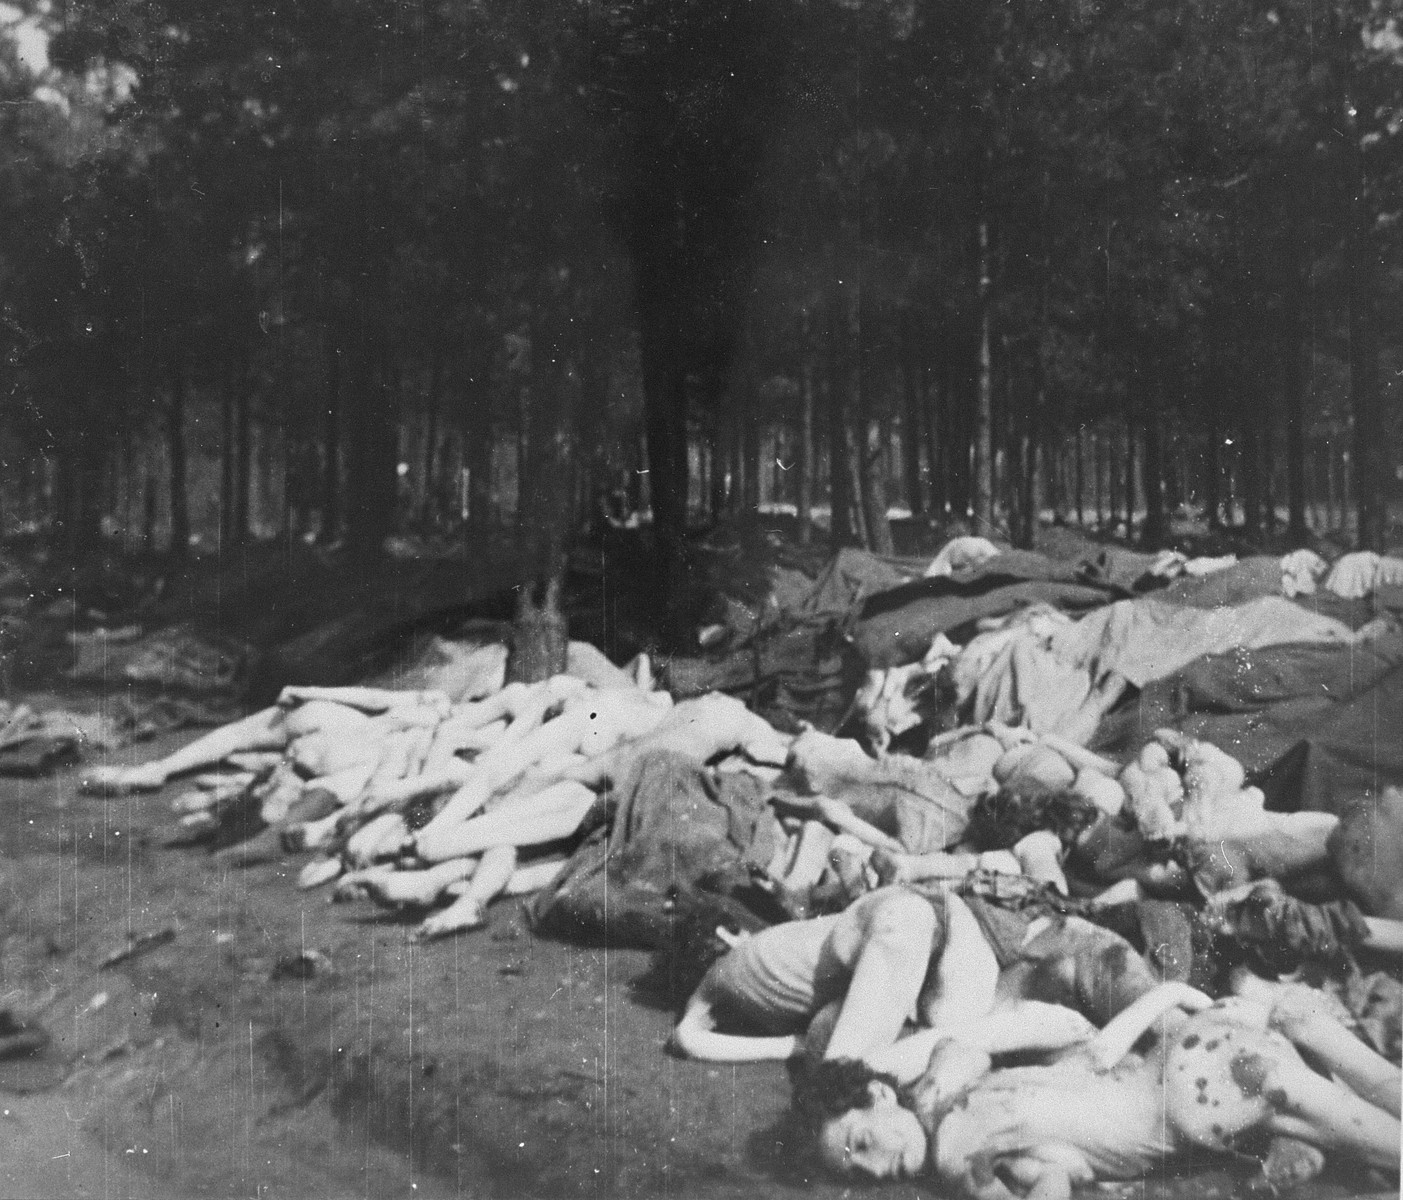 Corpses piled in a wooded area near Bergen-Belsen.